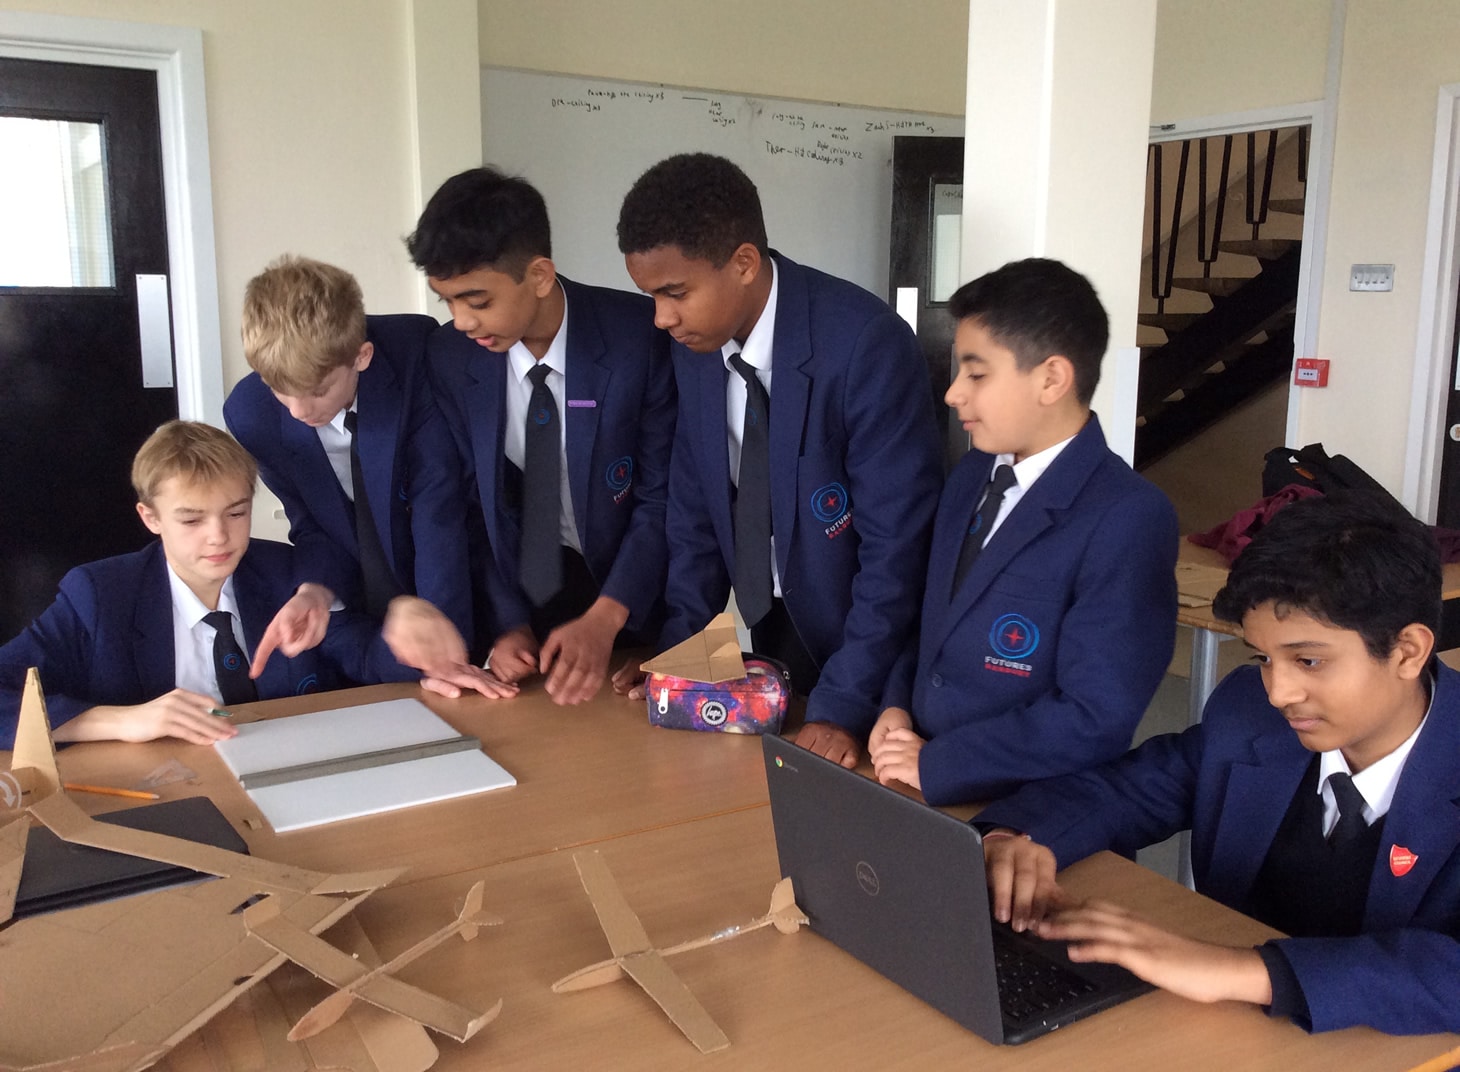 Year 9 students working on their designs